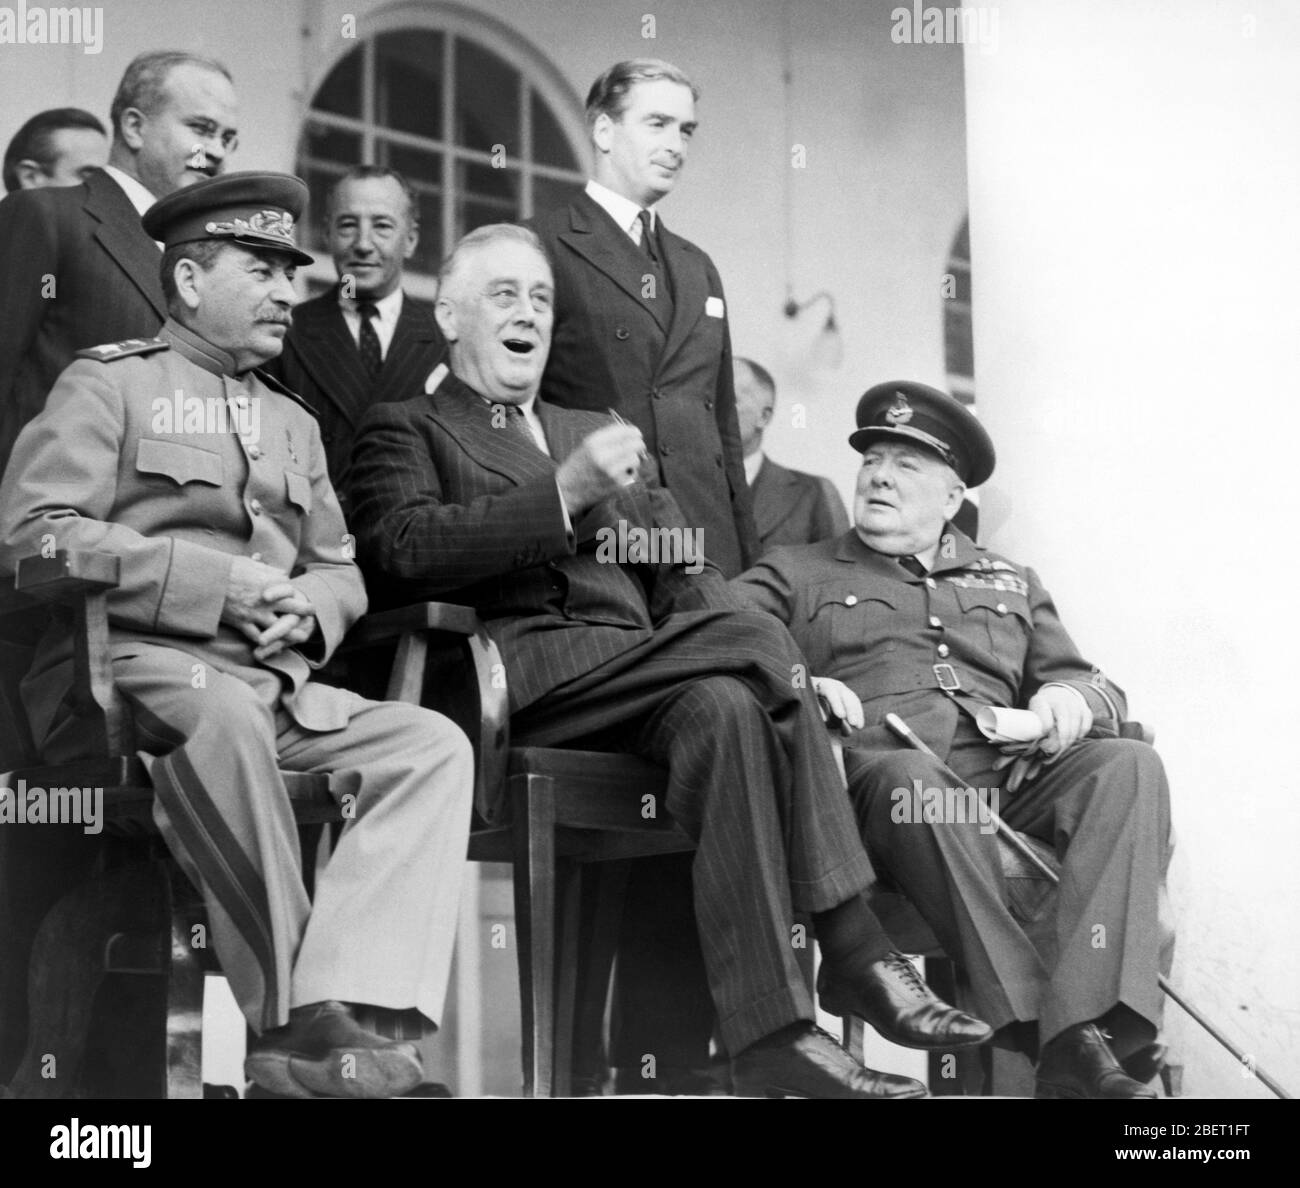 Roosevelt, Stalin and Churchill meeting at the Tehran Conference in 1943. Stock Photo